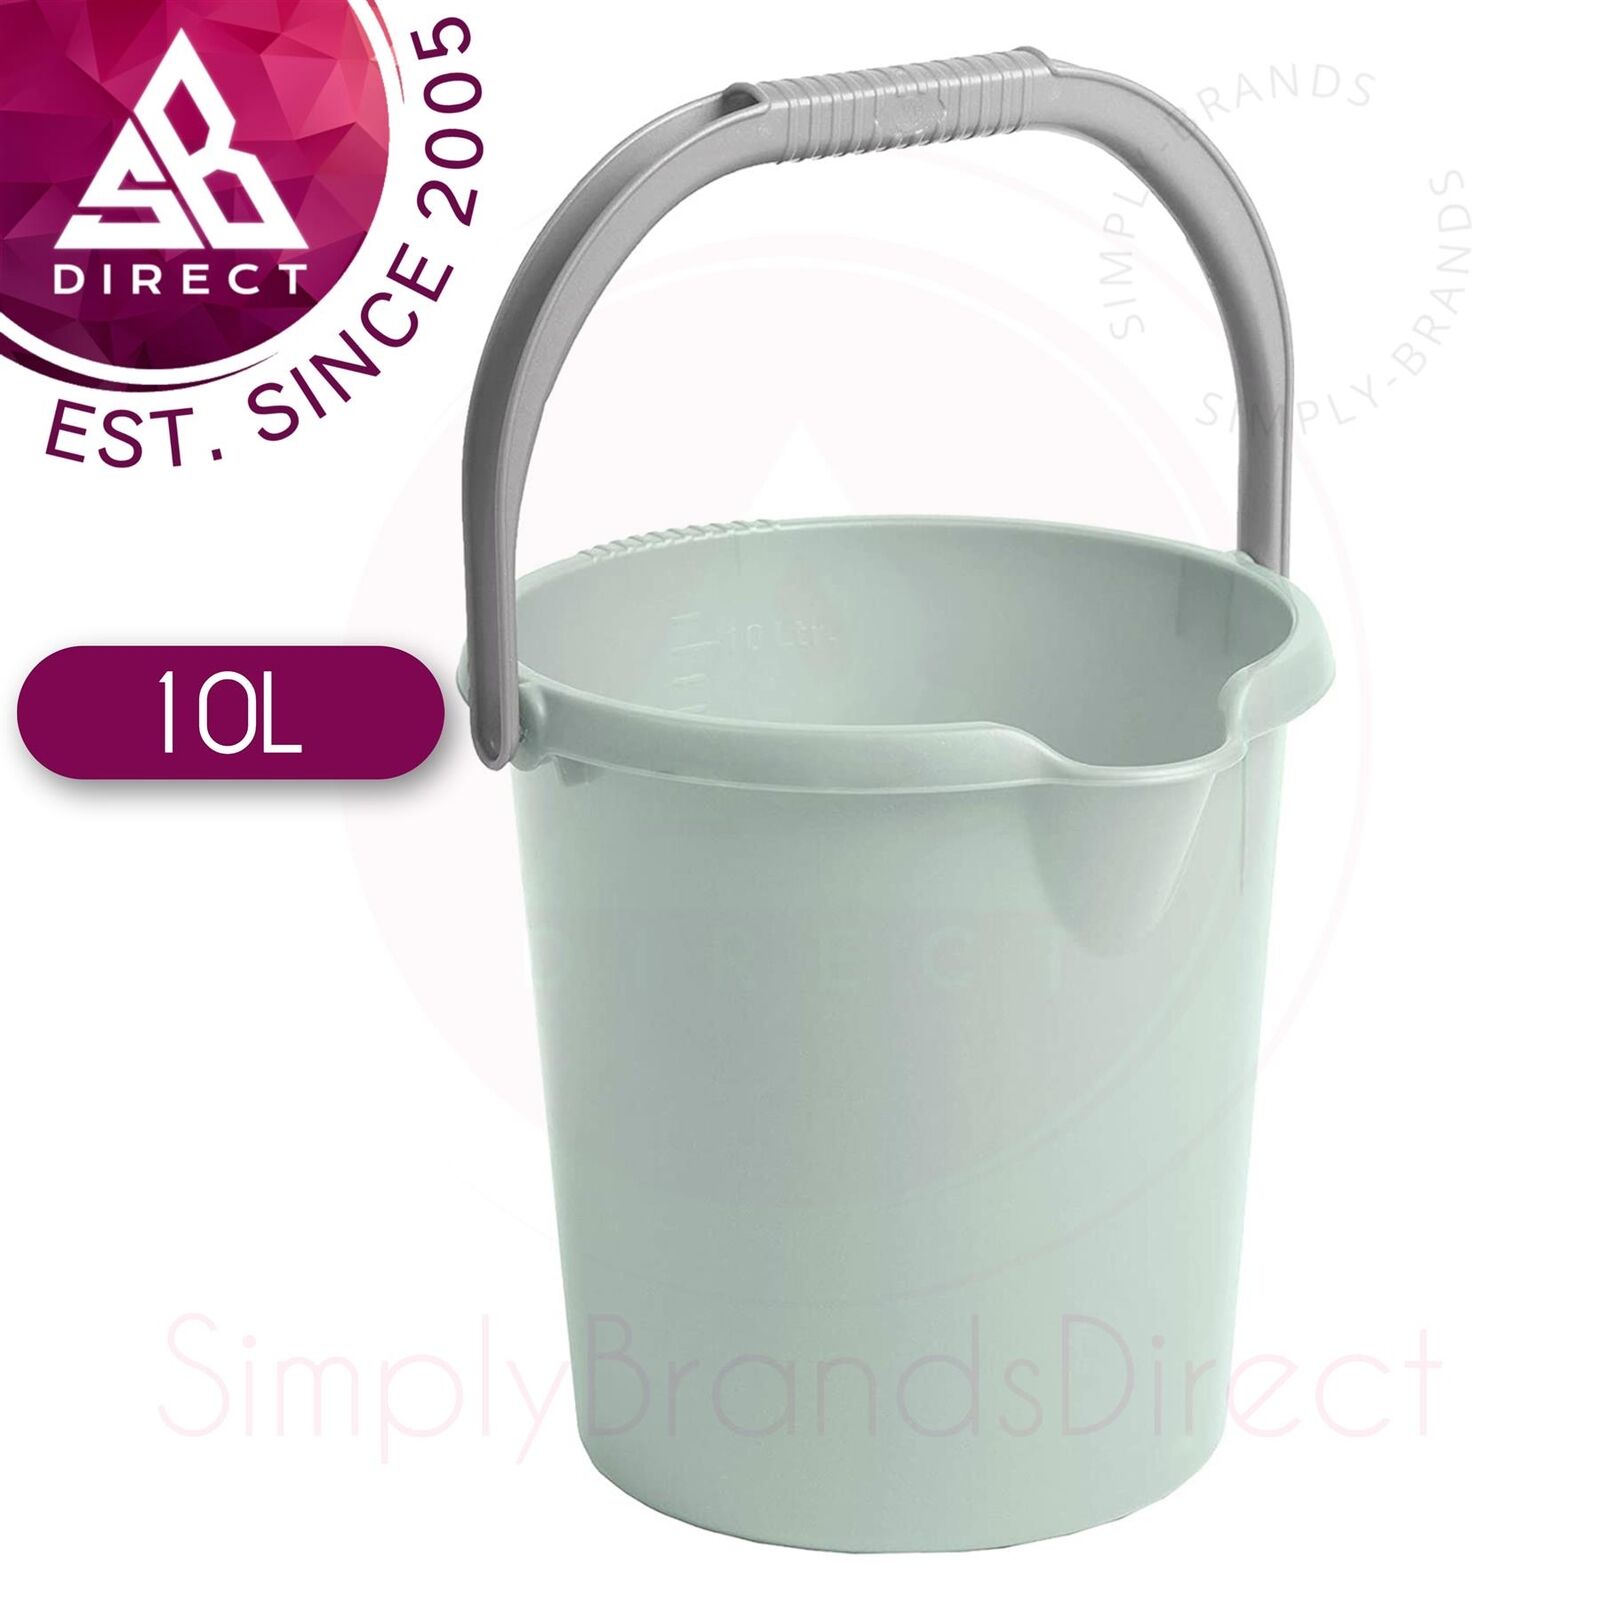 Wham Casa High Grade Durable Plastic Bucket Sage With Litre Scale│10l│silver